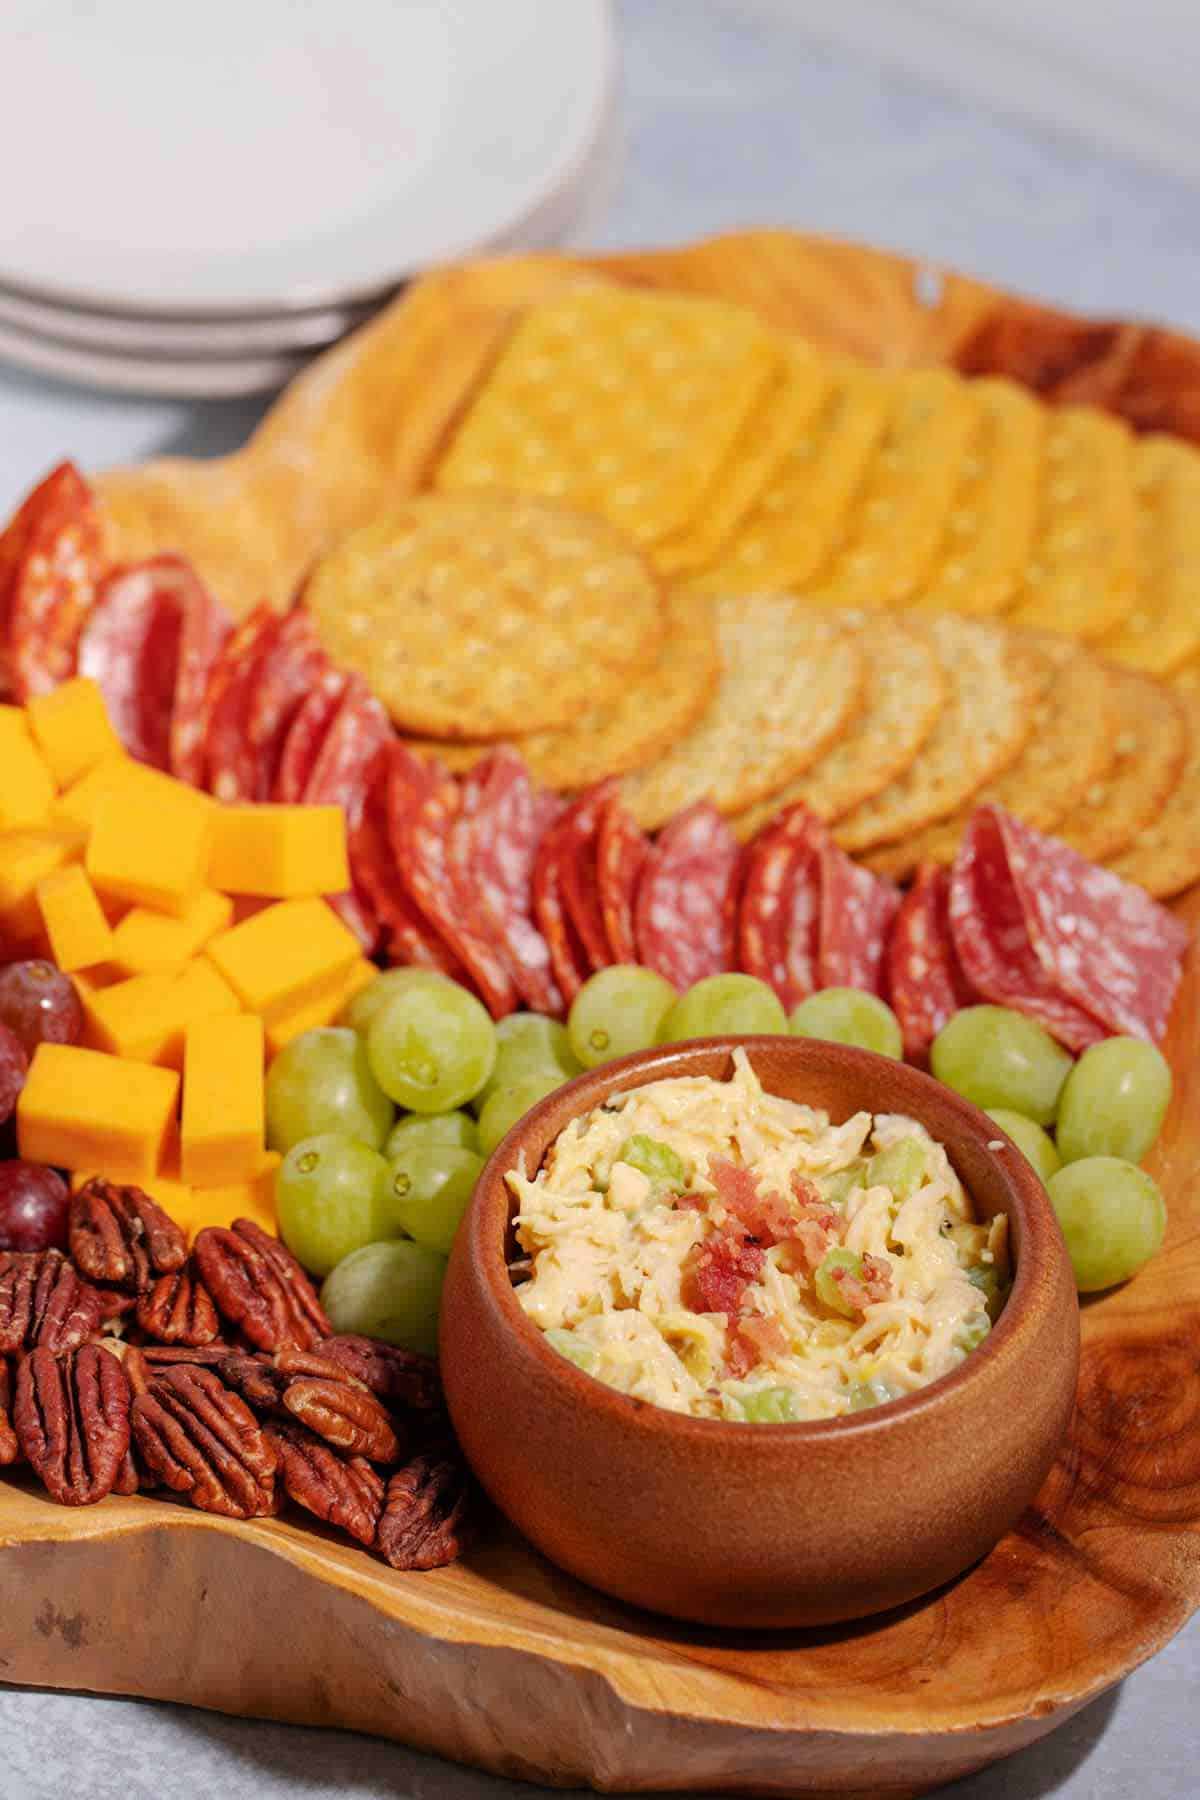 Charcuterie board with chicken salad, crackers, grapes, cheese cubes, and pecans.